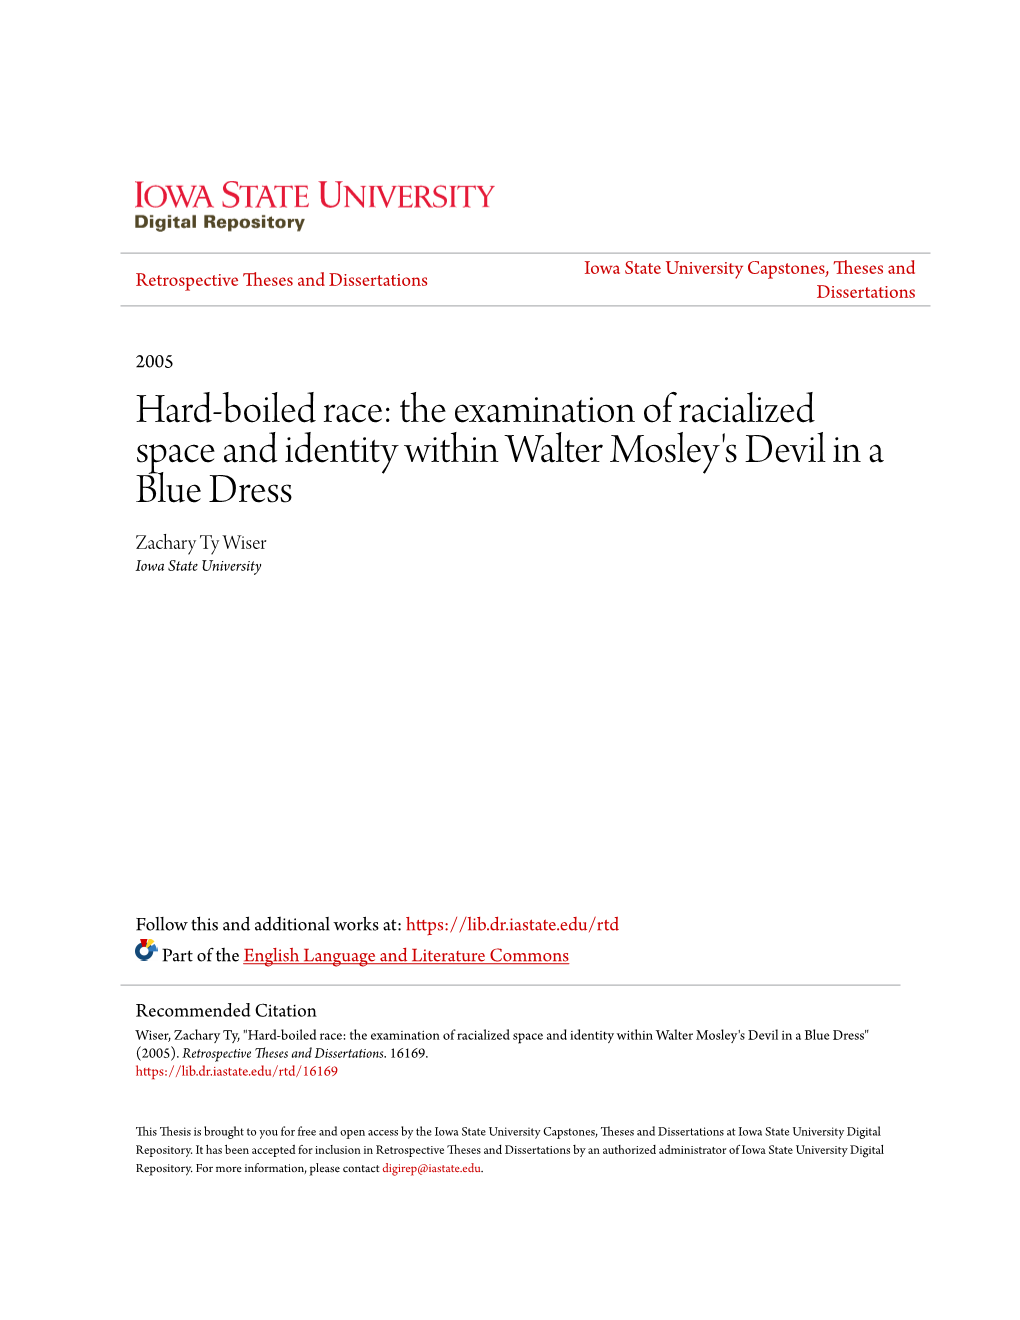 Hard-Boiled Race: the Examination of Racialized Space and Identity Within Walter Mosley's Devil in a Blue Dress Zachary Ty Wiser Iowa State University